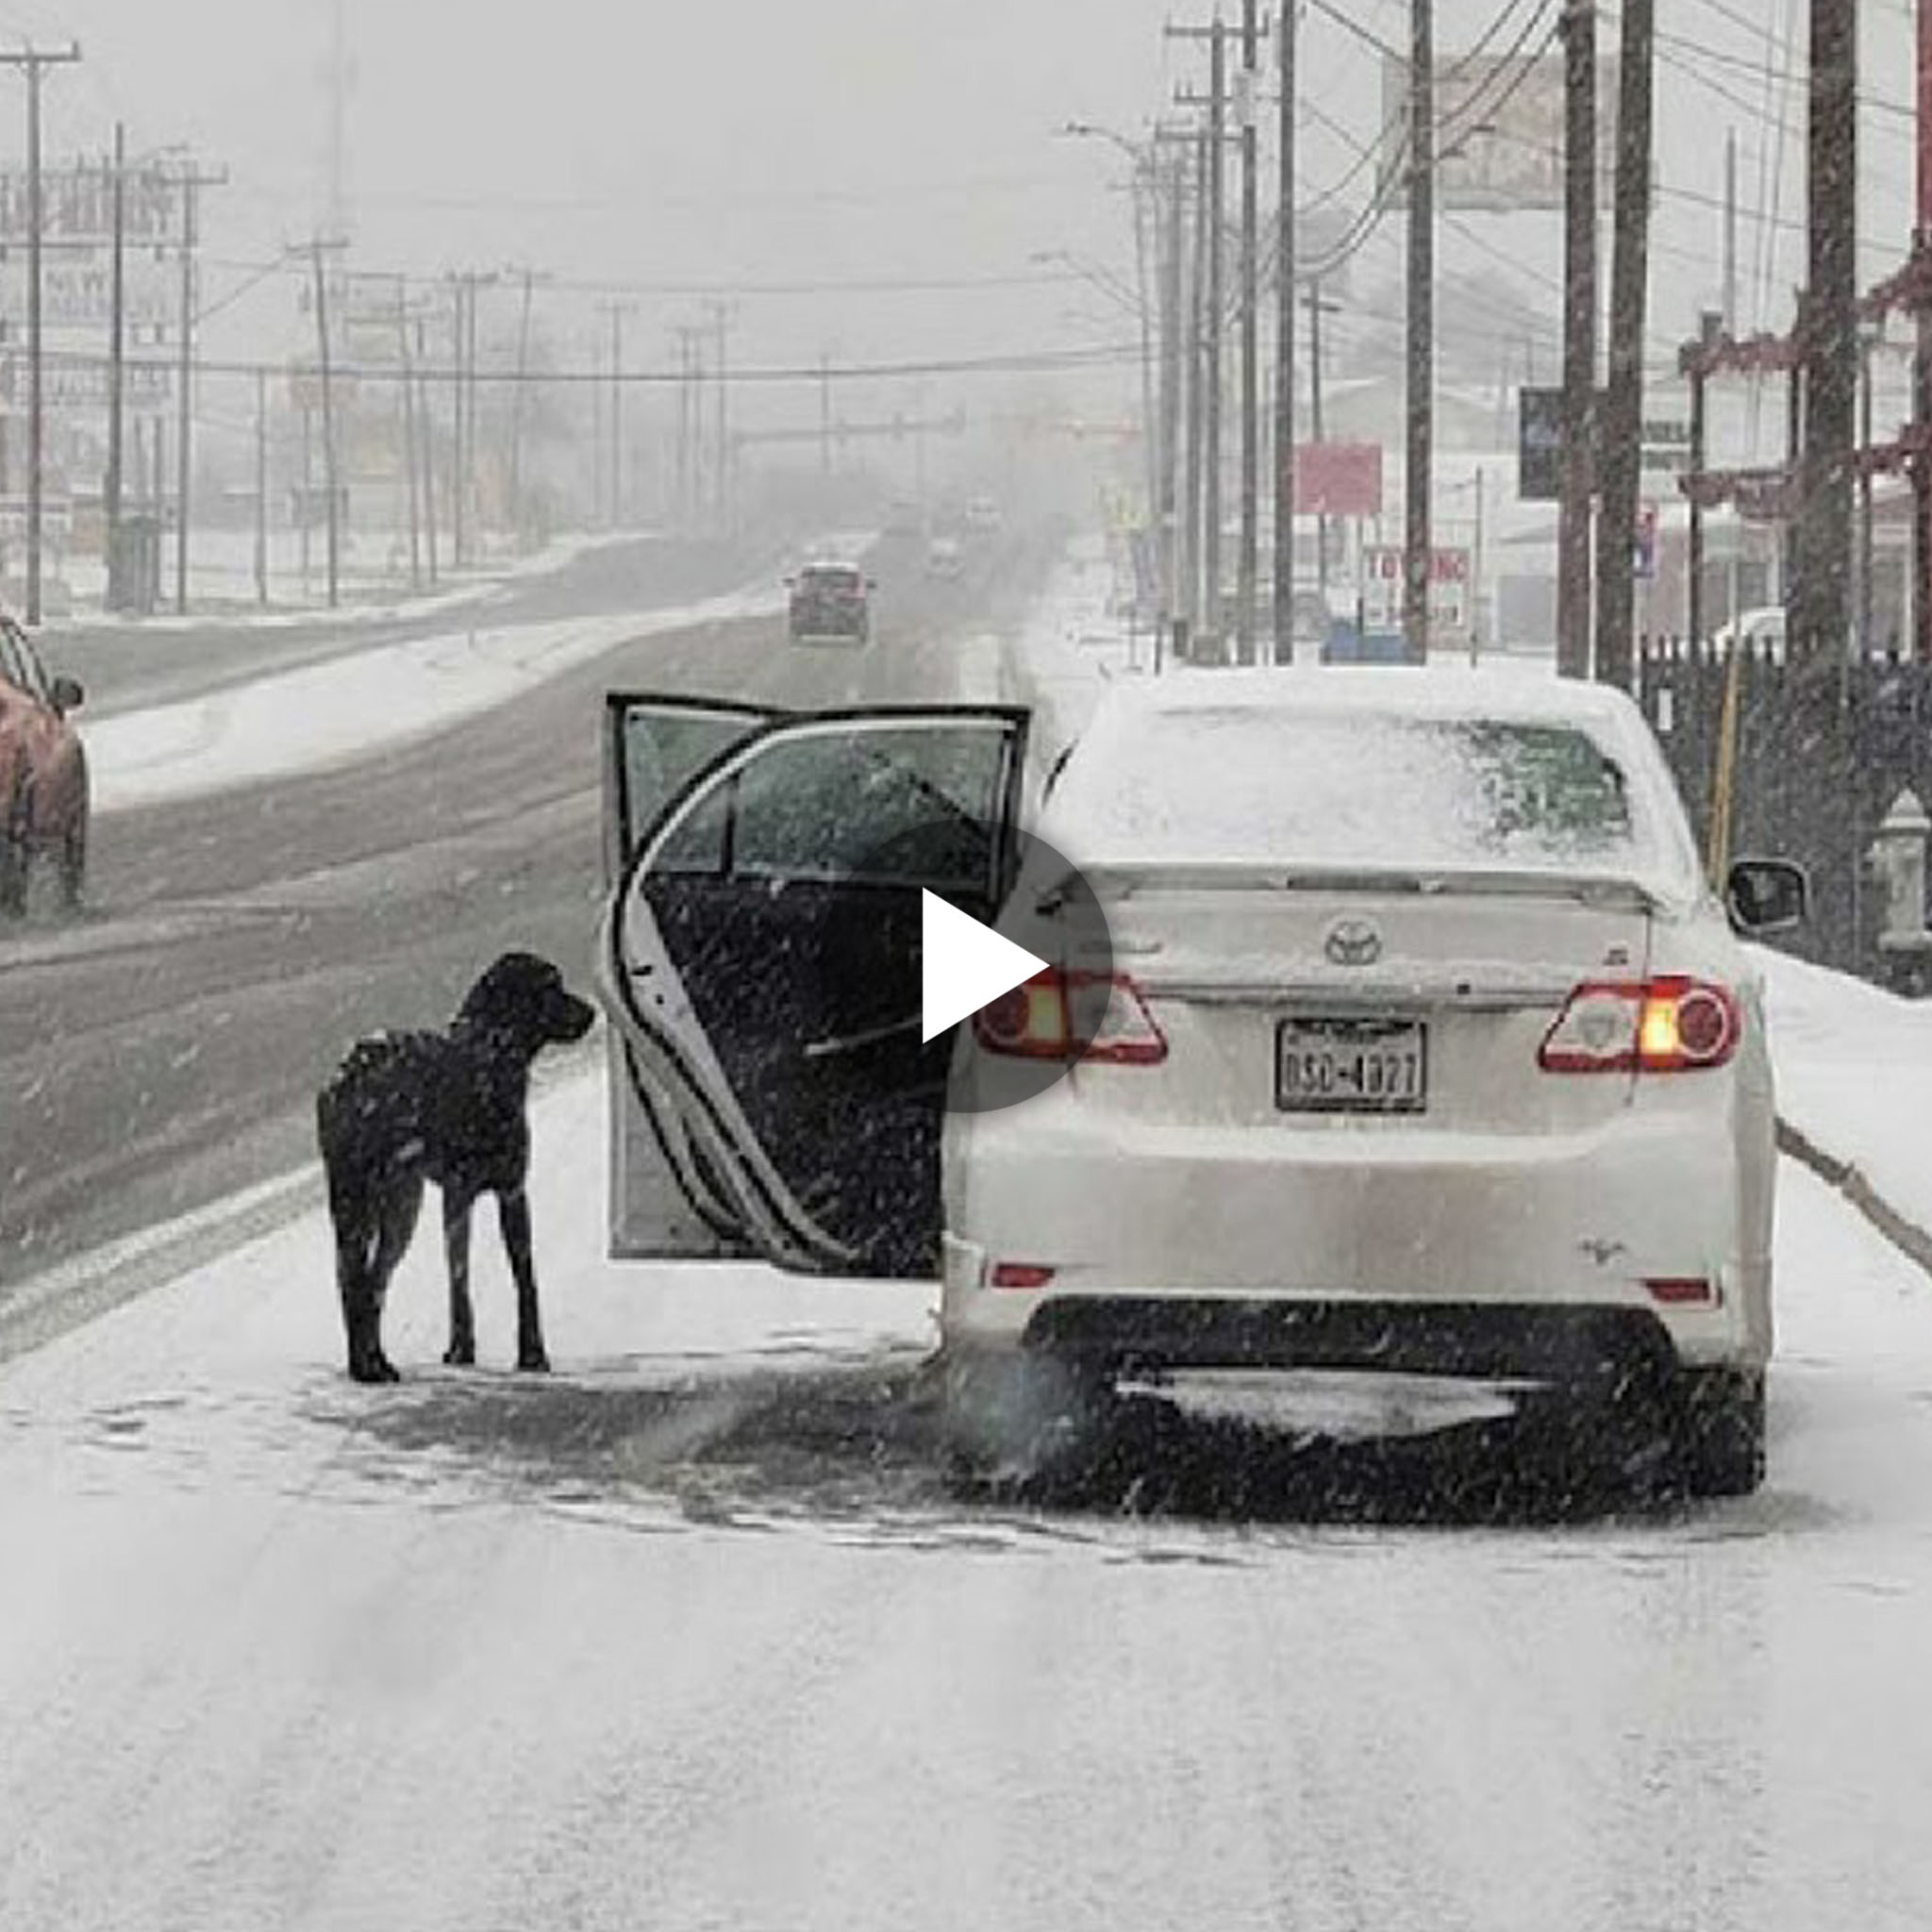 Warm winter video: A woman uses cornflakes to coax her freezing dog into her warm car, warming readers’ hearts.